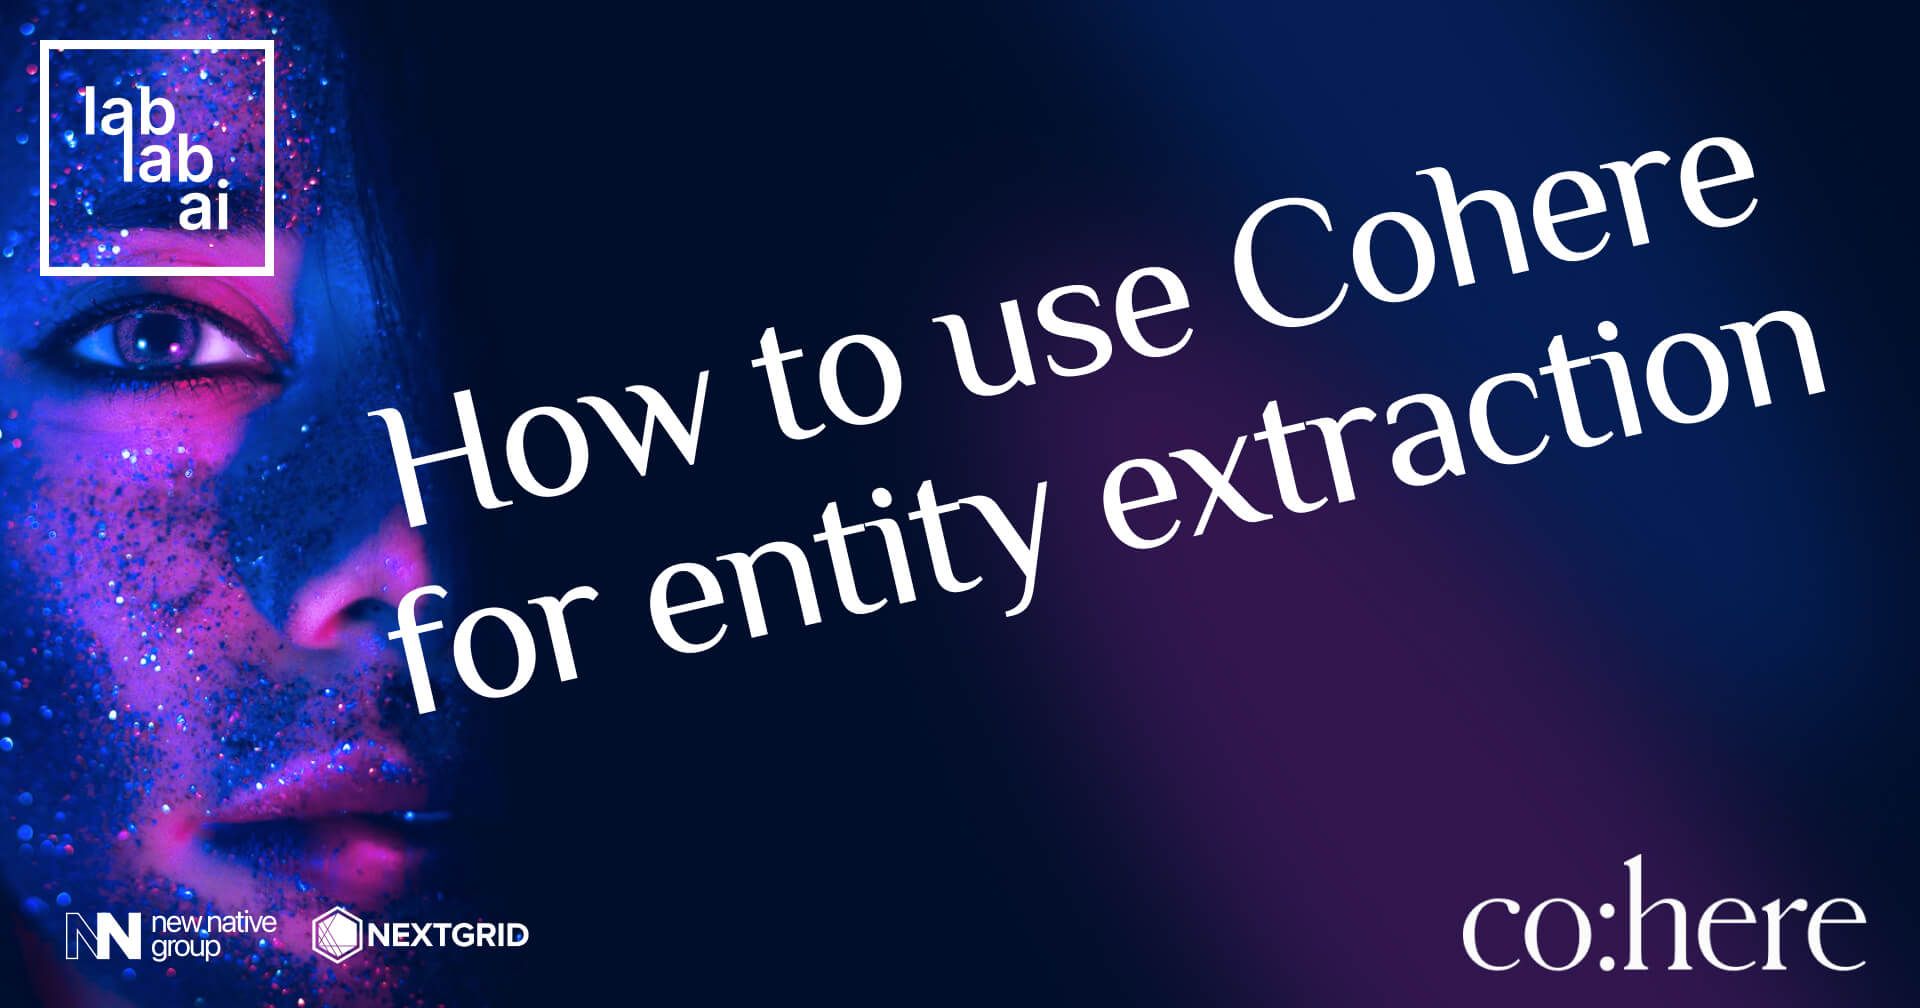 Cohere tutorial: Entity extraction